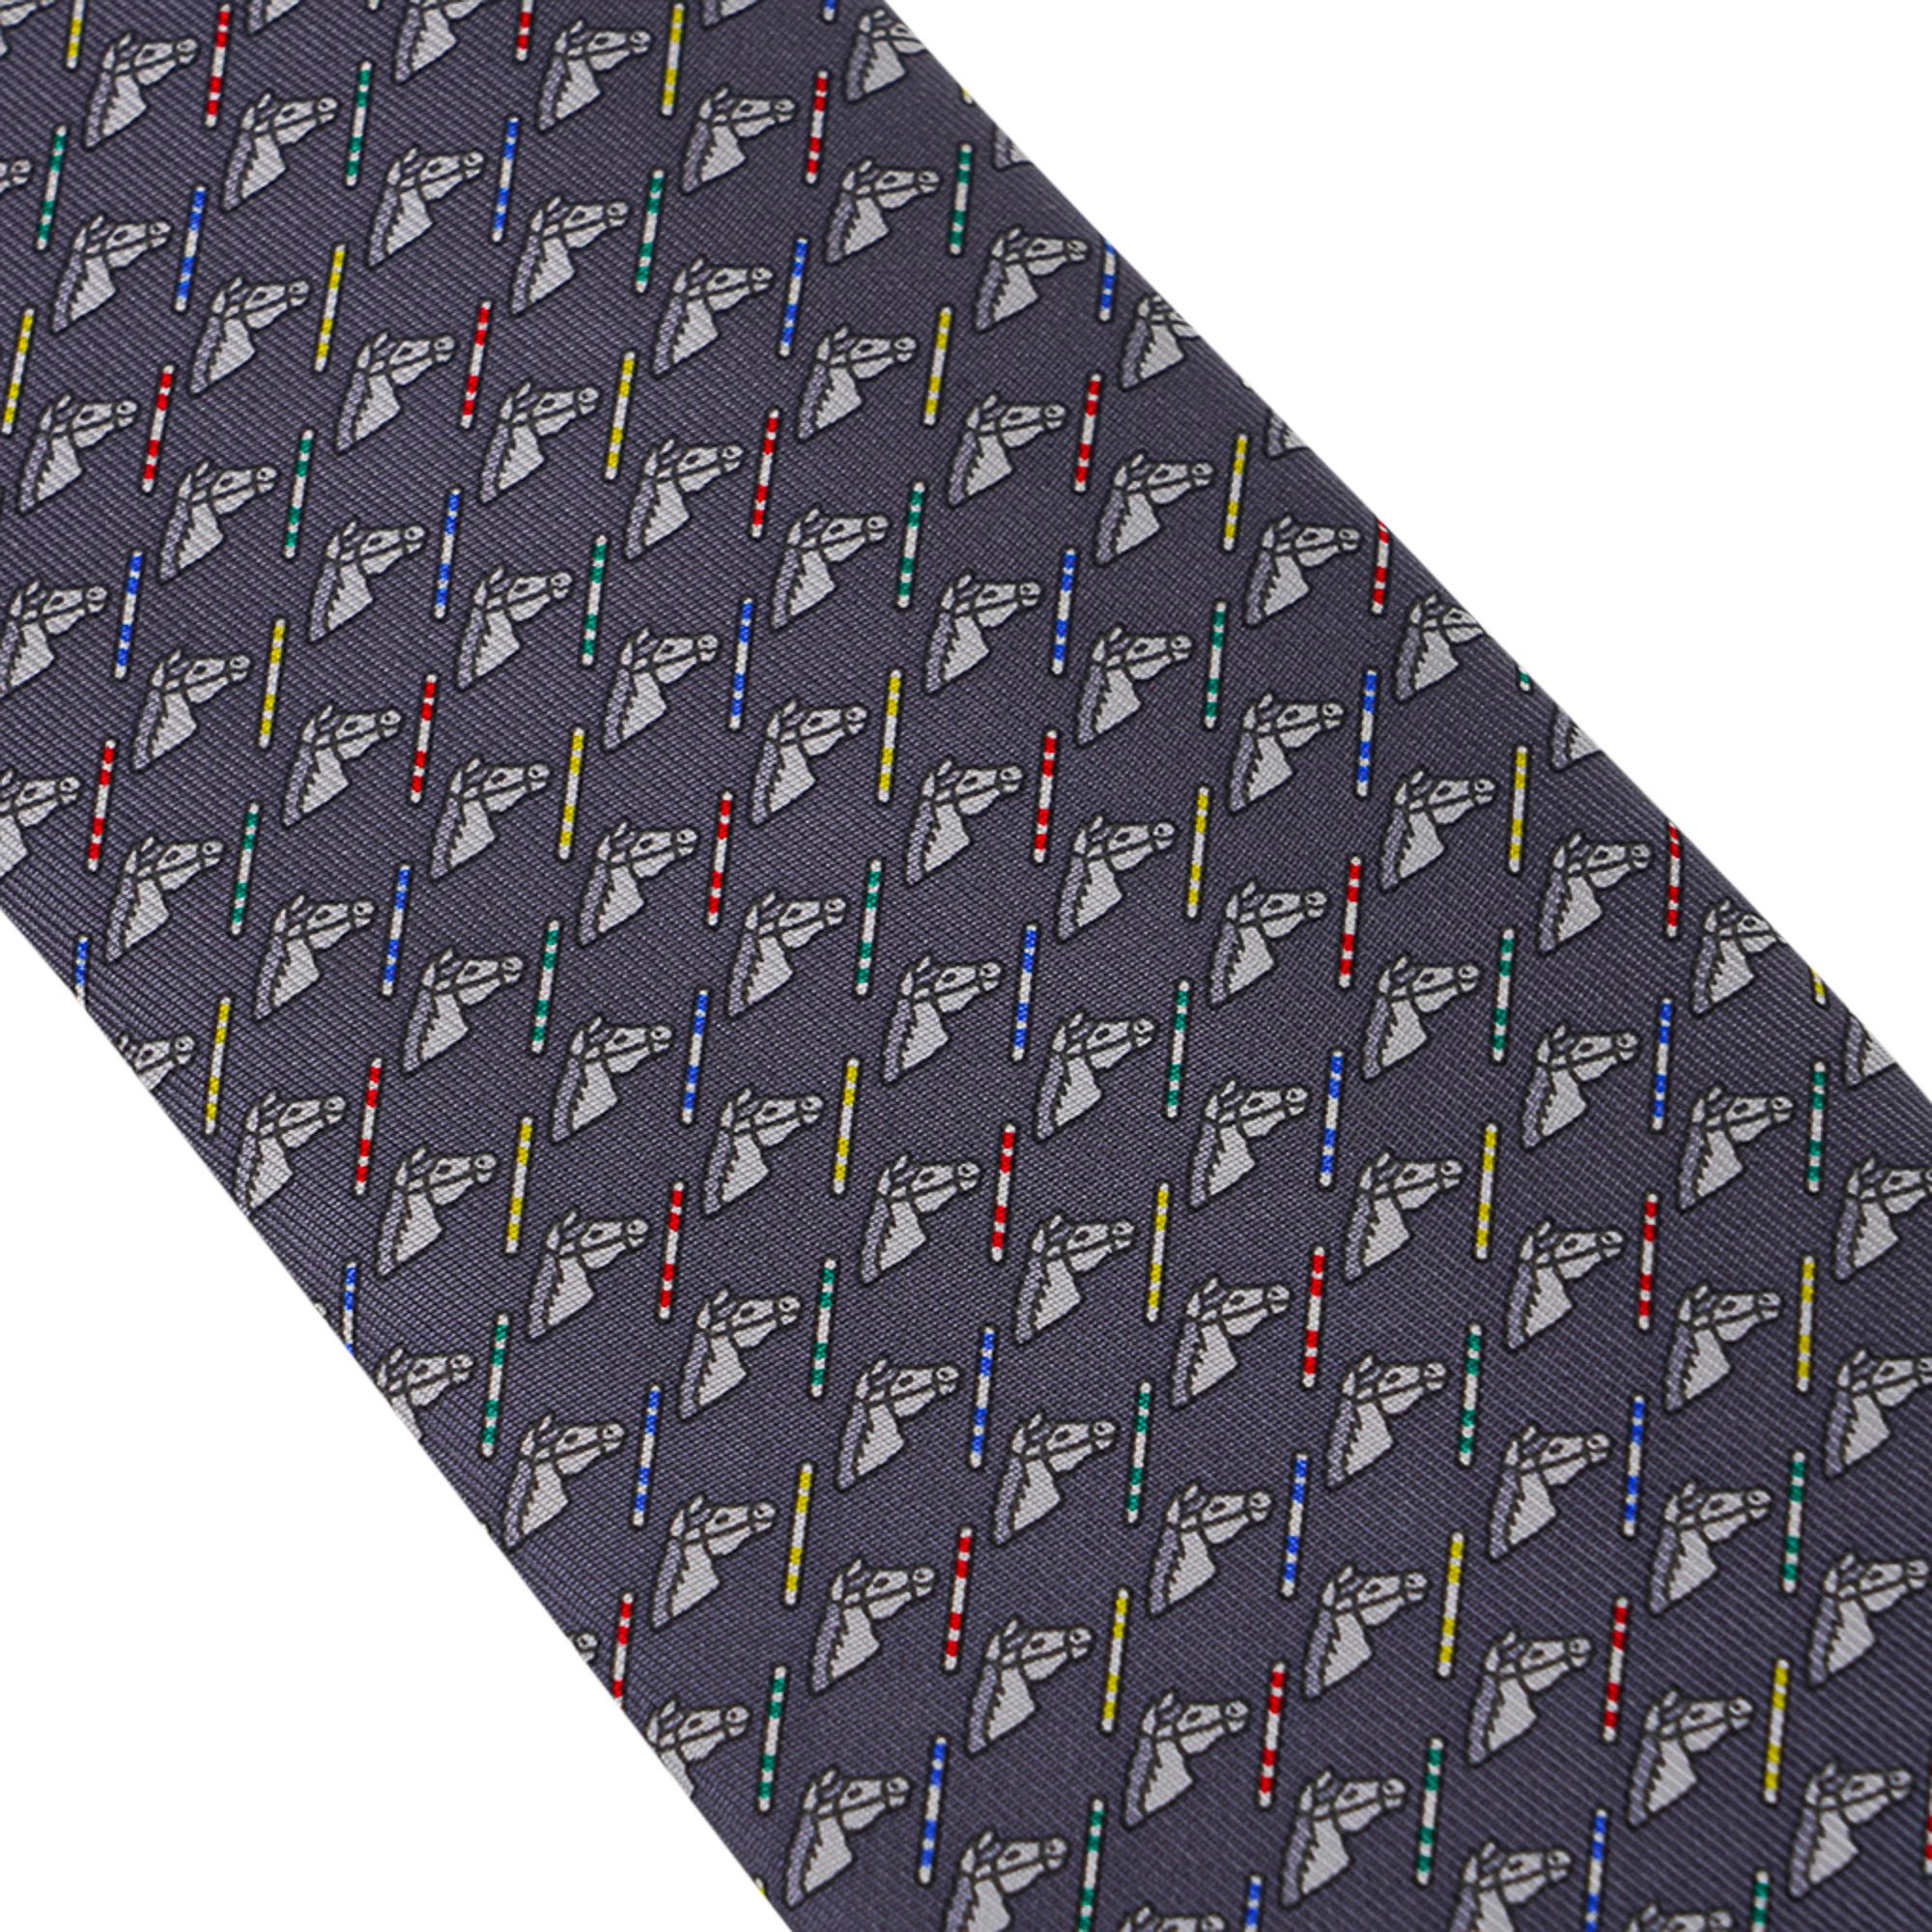 Mightychic offers an Hermes Colorful Jump Tie featured in Anthracite and Gris Clair.
Hand-sewn silk twill.
An equestrian surprise in the lining of the tie!
Designed by Philippe Mouquet
Made in France.
Comes with signature Hermes box. 
NEW or NEVER